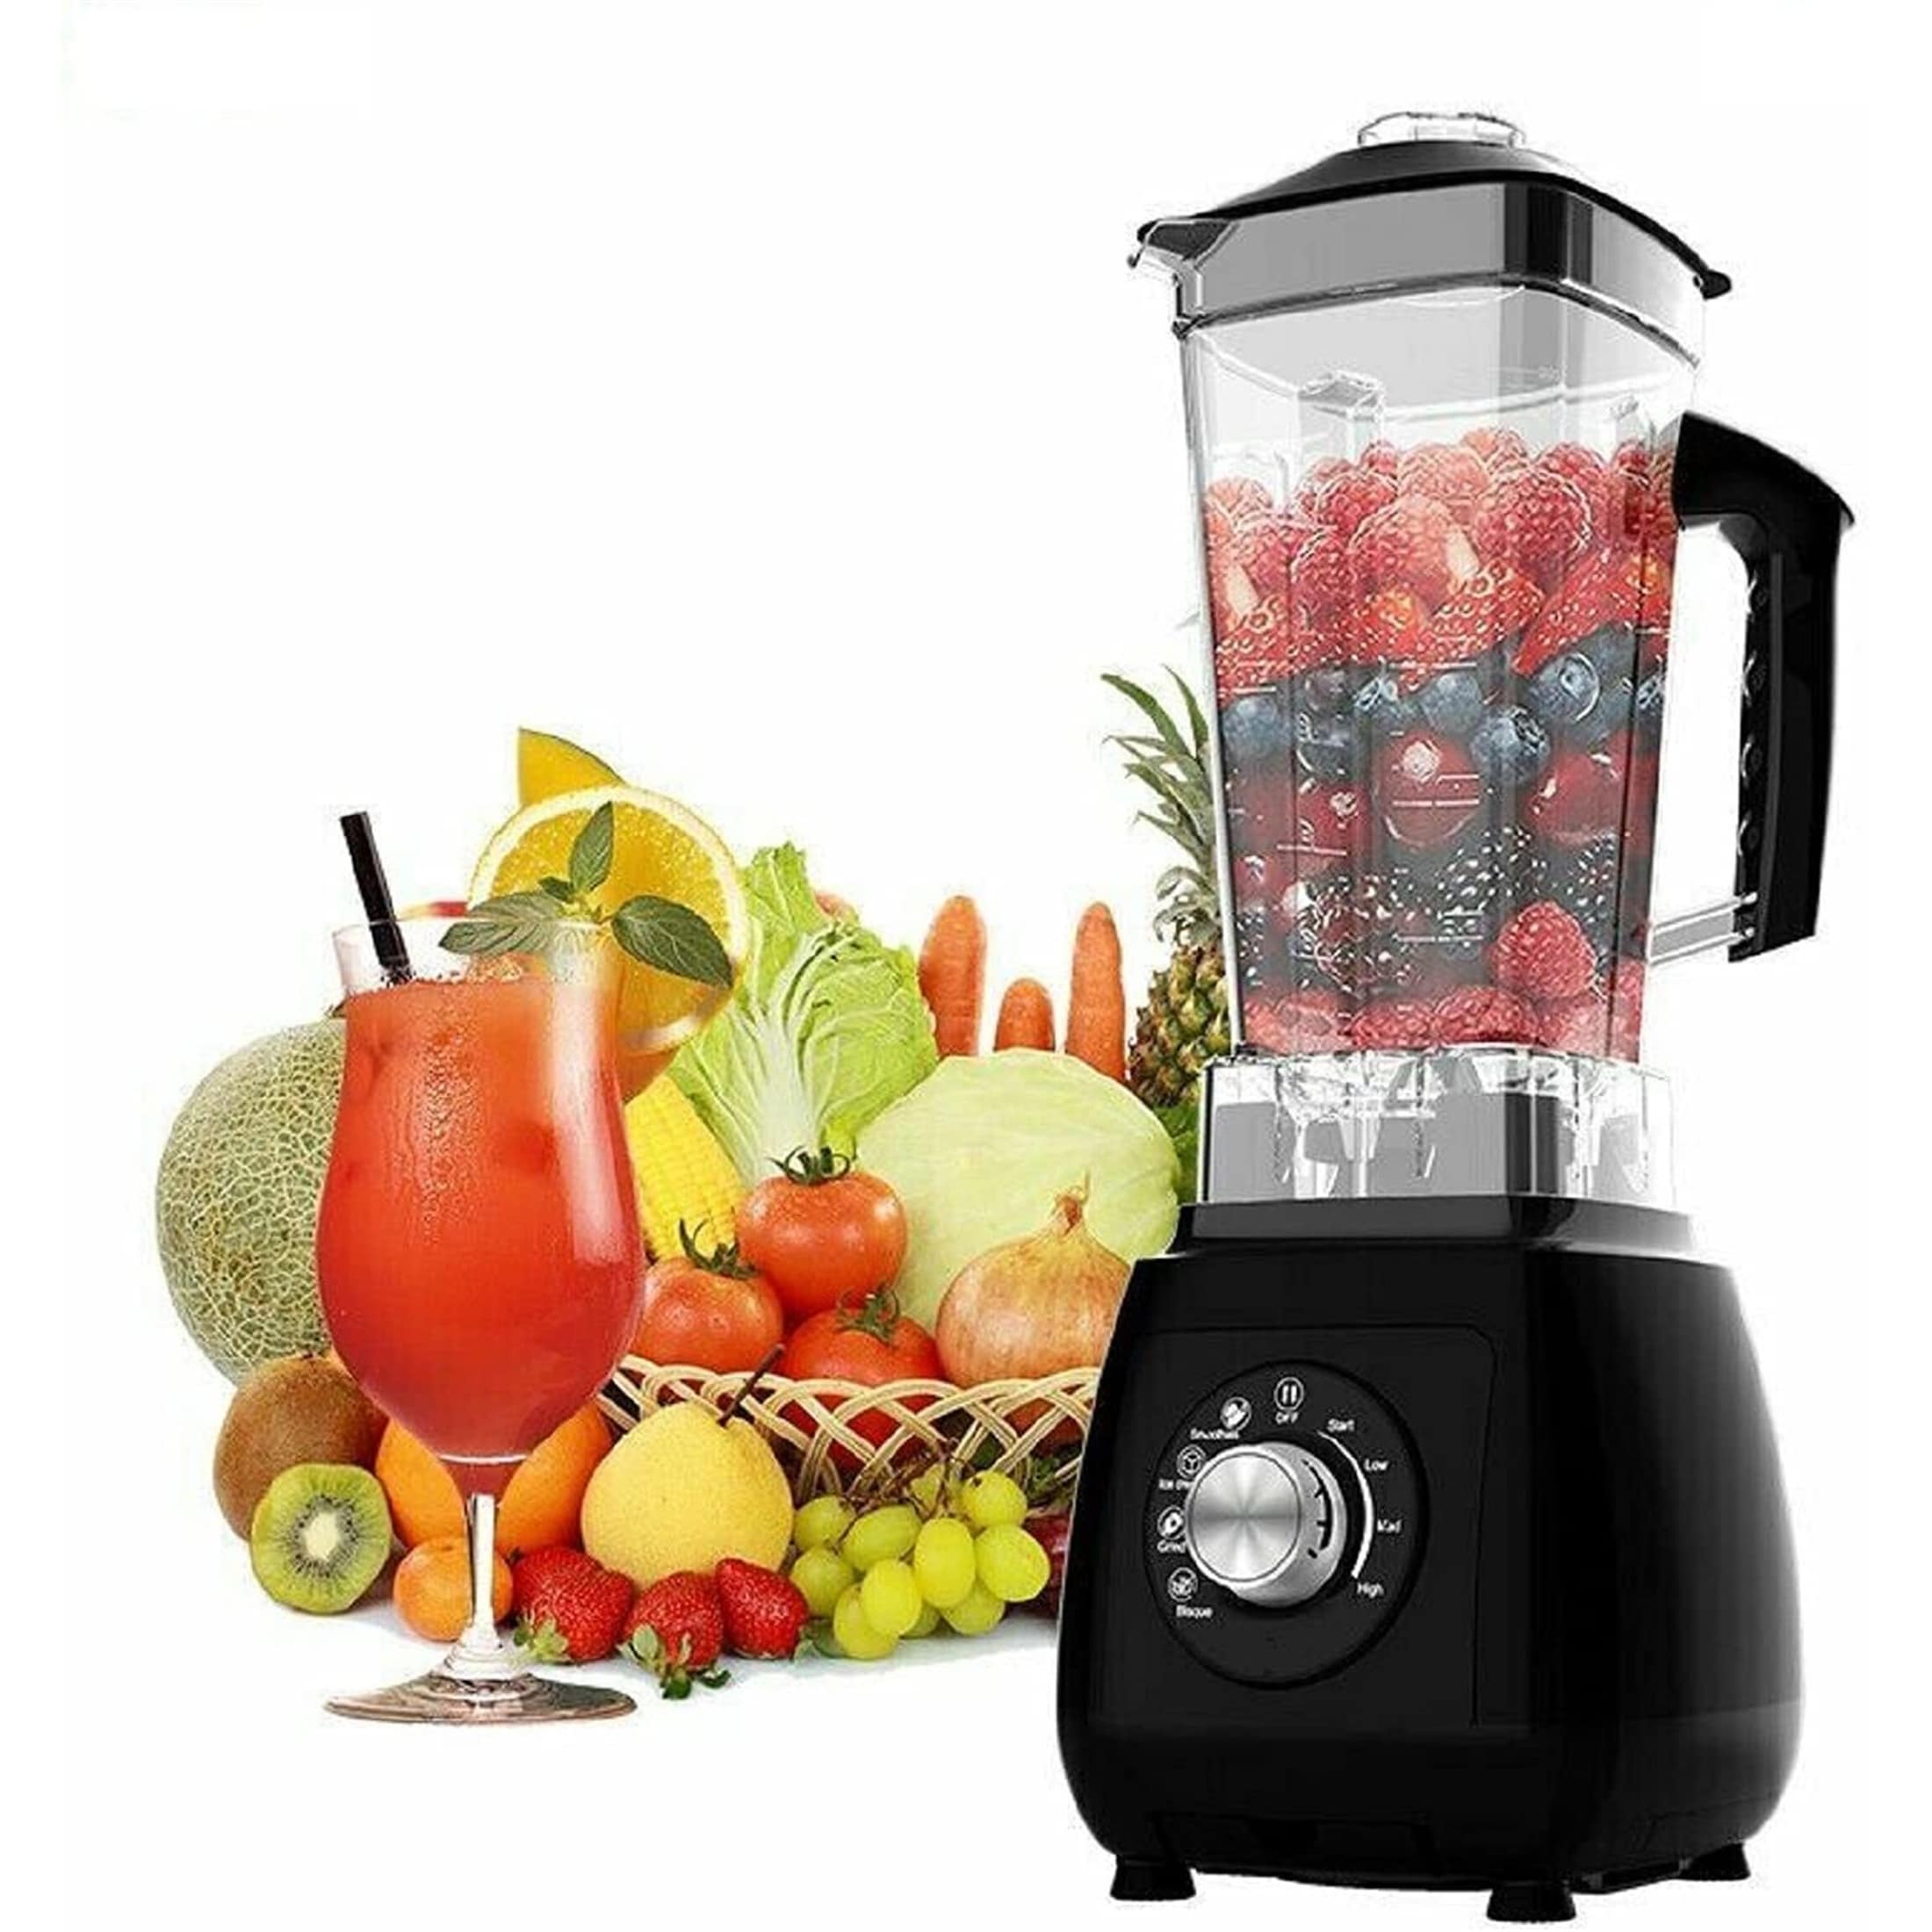 Kenmore 64 oz Stand Blender, 1200W, Smoothie and Ice Crush Modes, Red